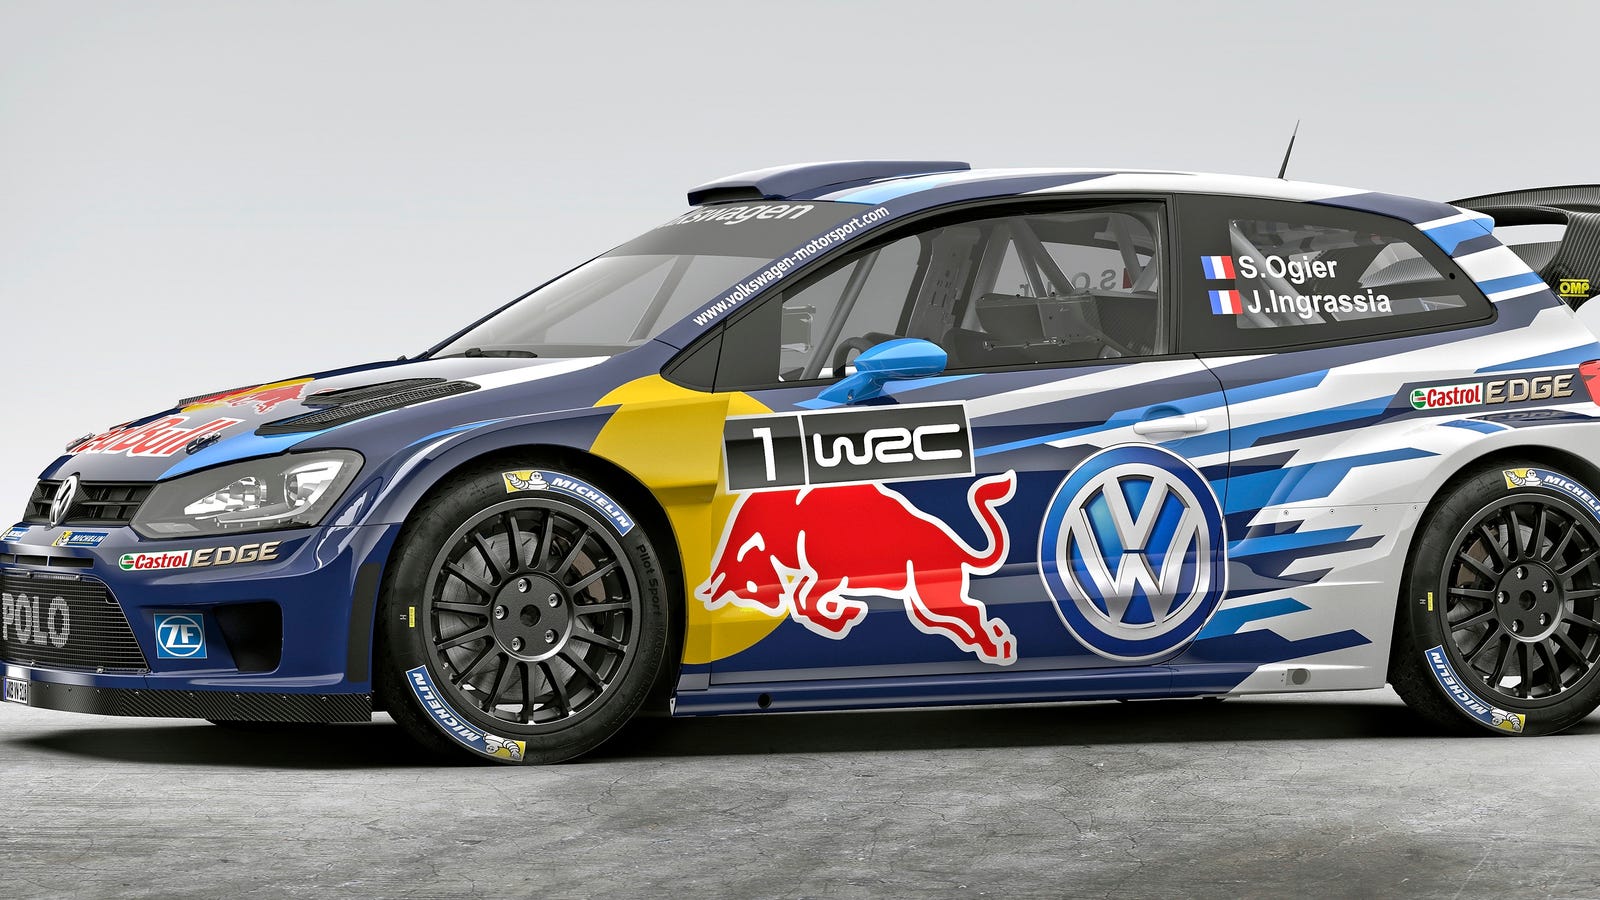 The New VW Polo Rally Car Is [hnnng]